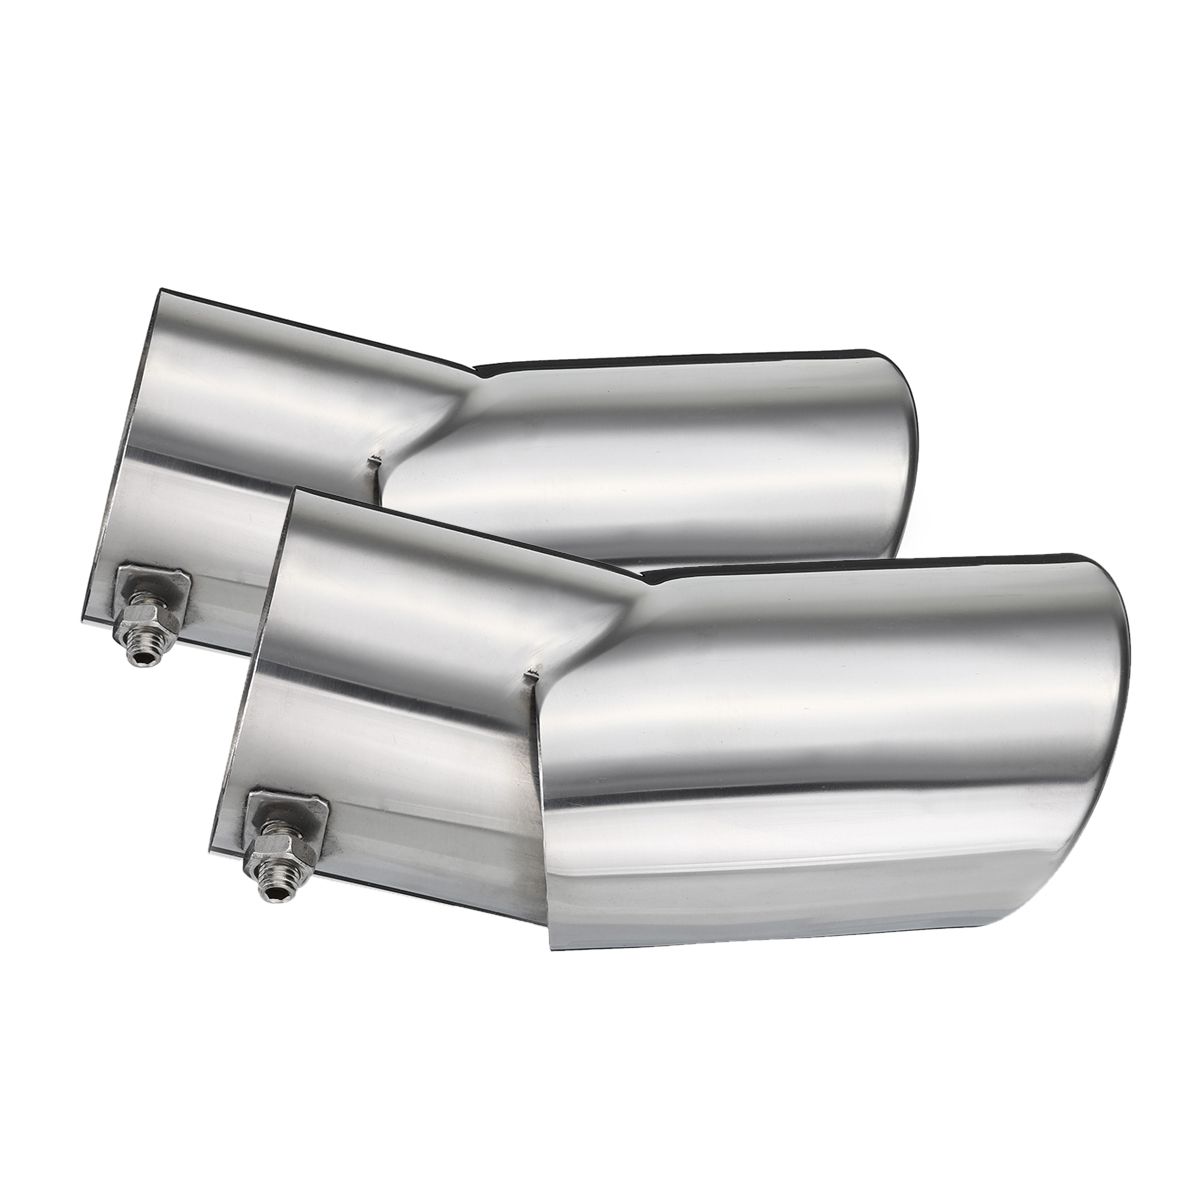 Pair-Stainless-Steel-Exhaust-Muffler-Tail-Pipe-For-Land-Rover-Sport-2002-2010-1692832